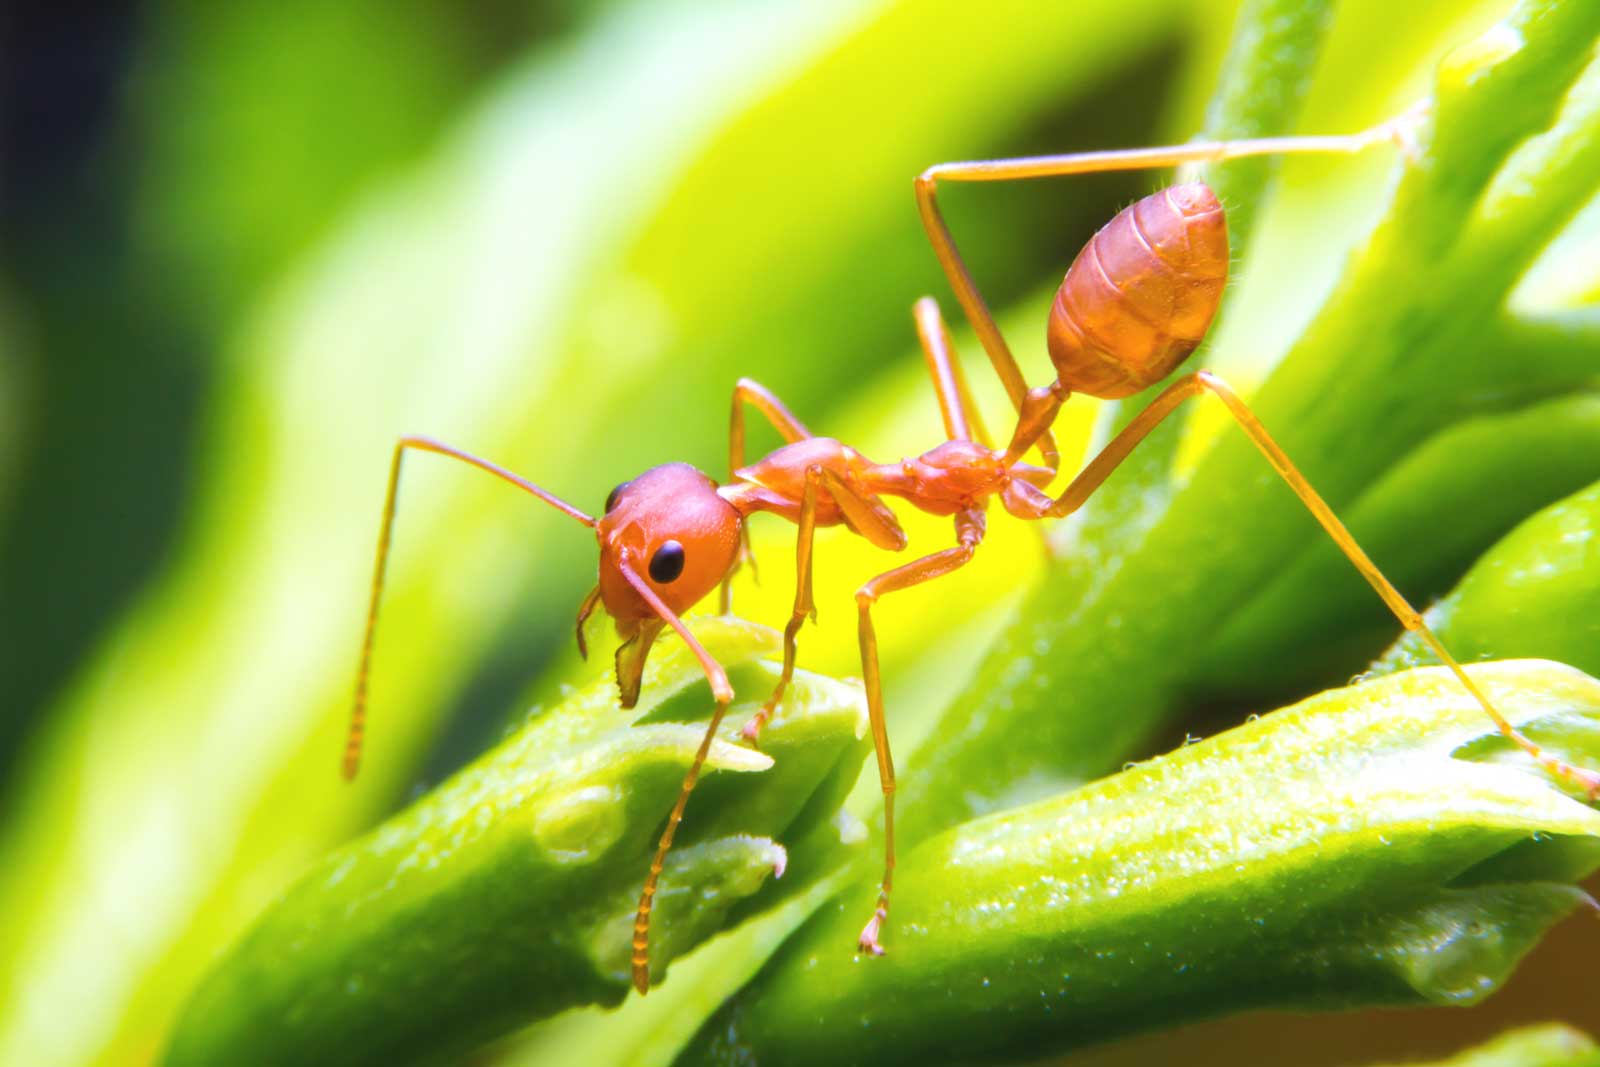 Fire Ant on Leaf - Evergreen Pest Control helps you protect against fire ants